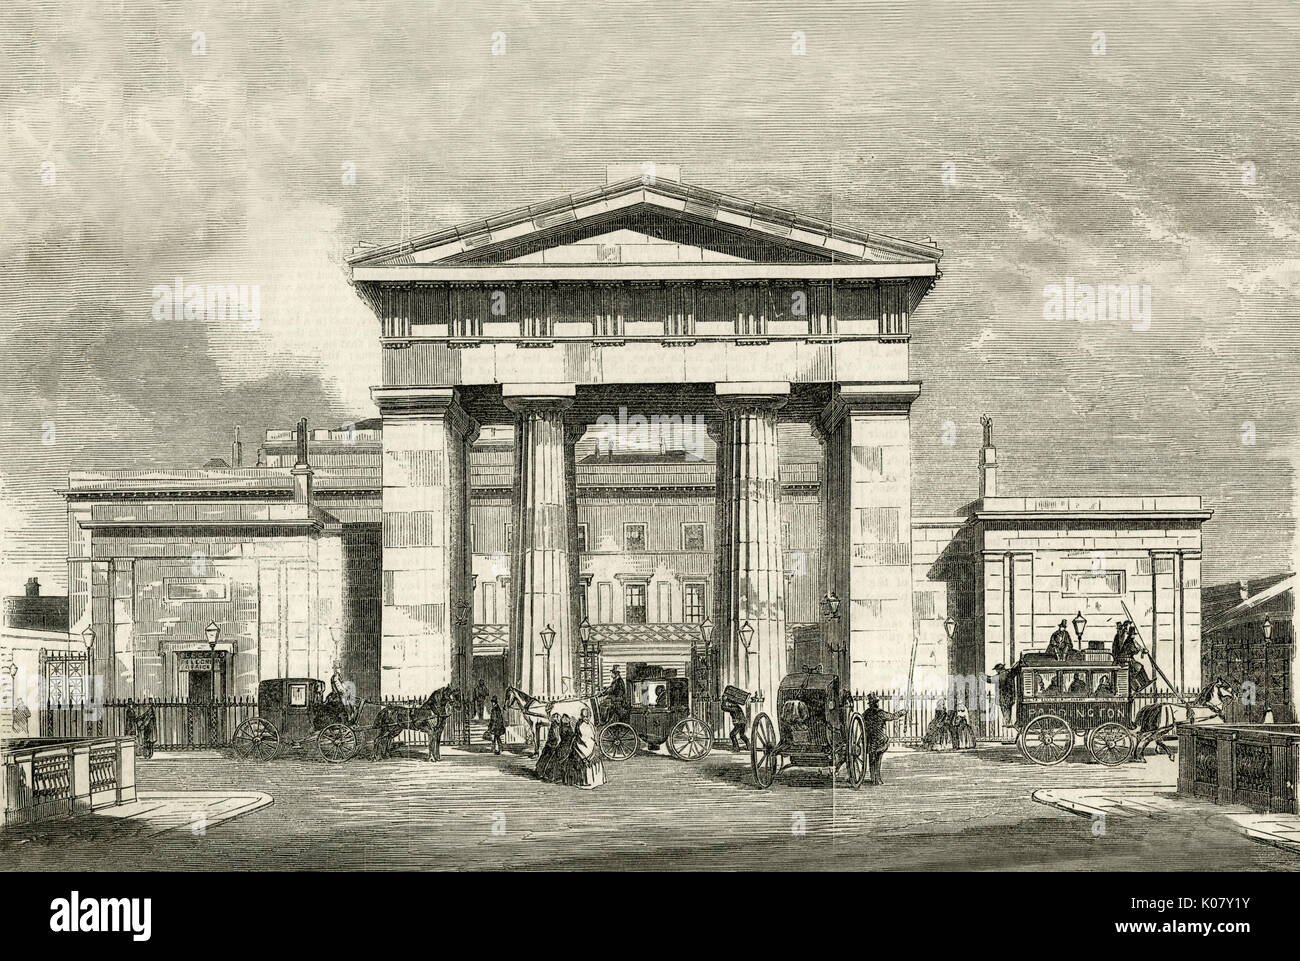 Euston- Station, London serving the London and North-Western Railway. The Euston Arch, built in 1837, was the original entrance to the station, facing onto Drummond Street. It was demolished in 1961.      Date: 1858 Stock Photo